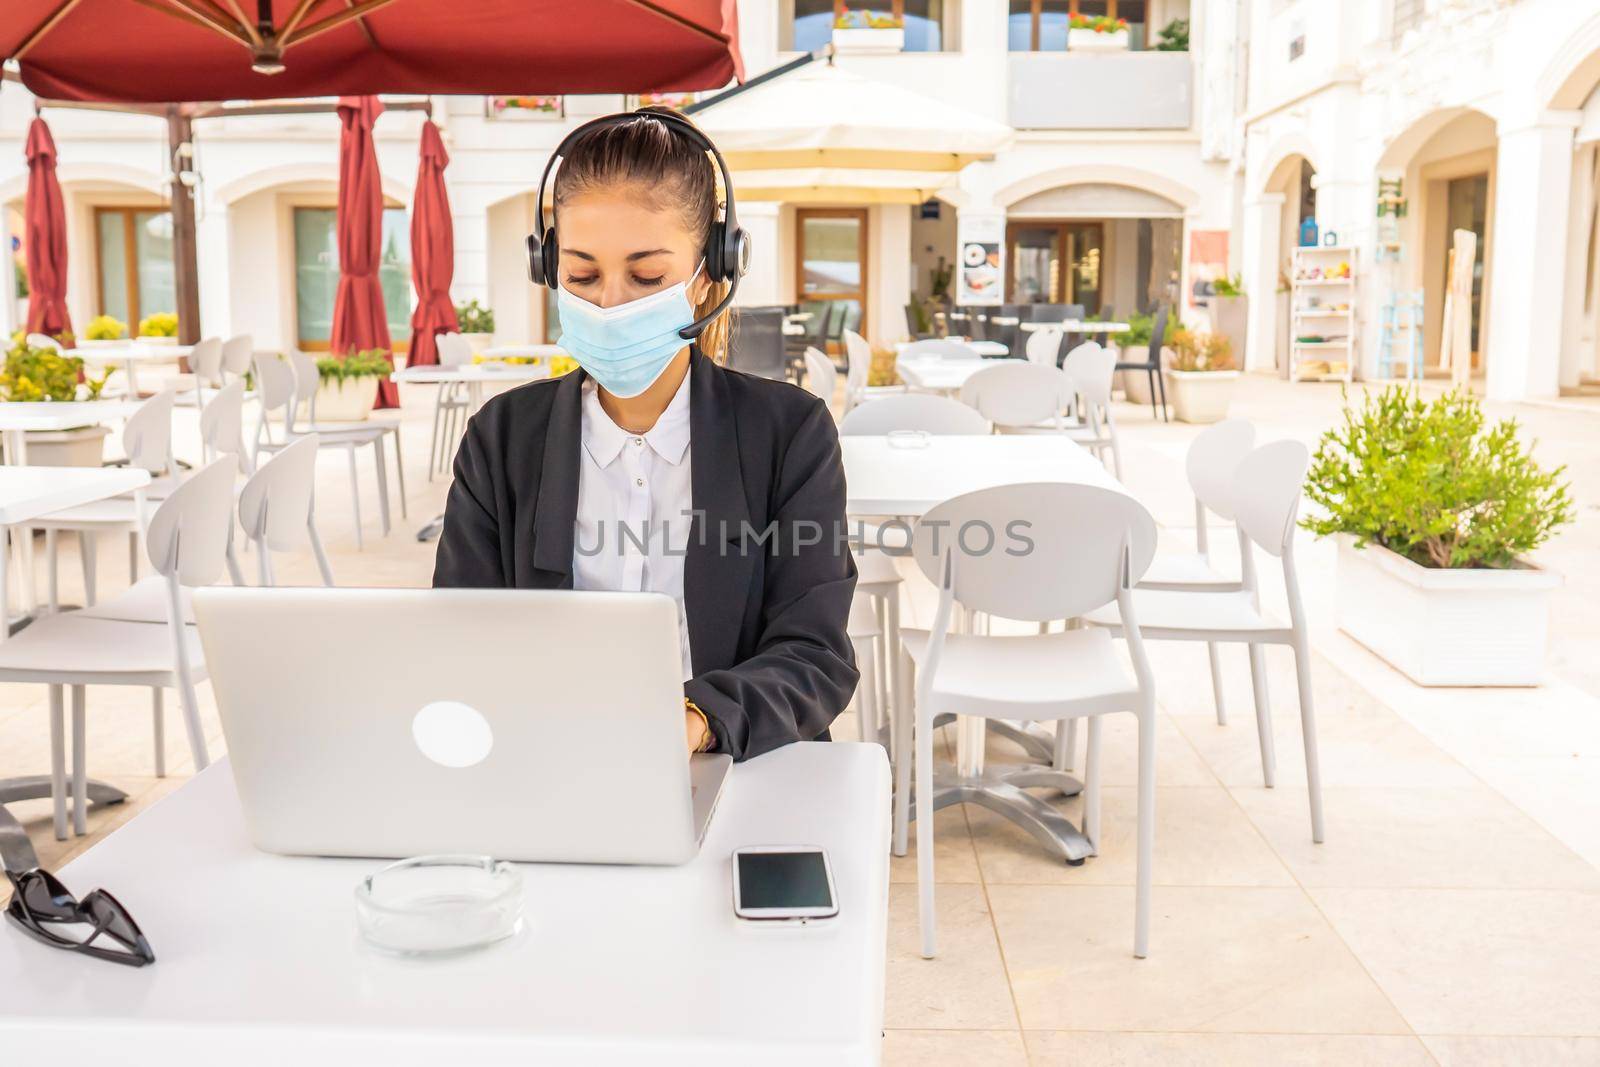 Self entrepreneur woman working in outdoor bar table using laptop wearing protective medical face mask due to social distancing for Covid-19 pandemic. New normal jobs with mobile wi-fi technology